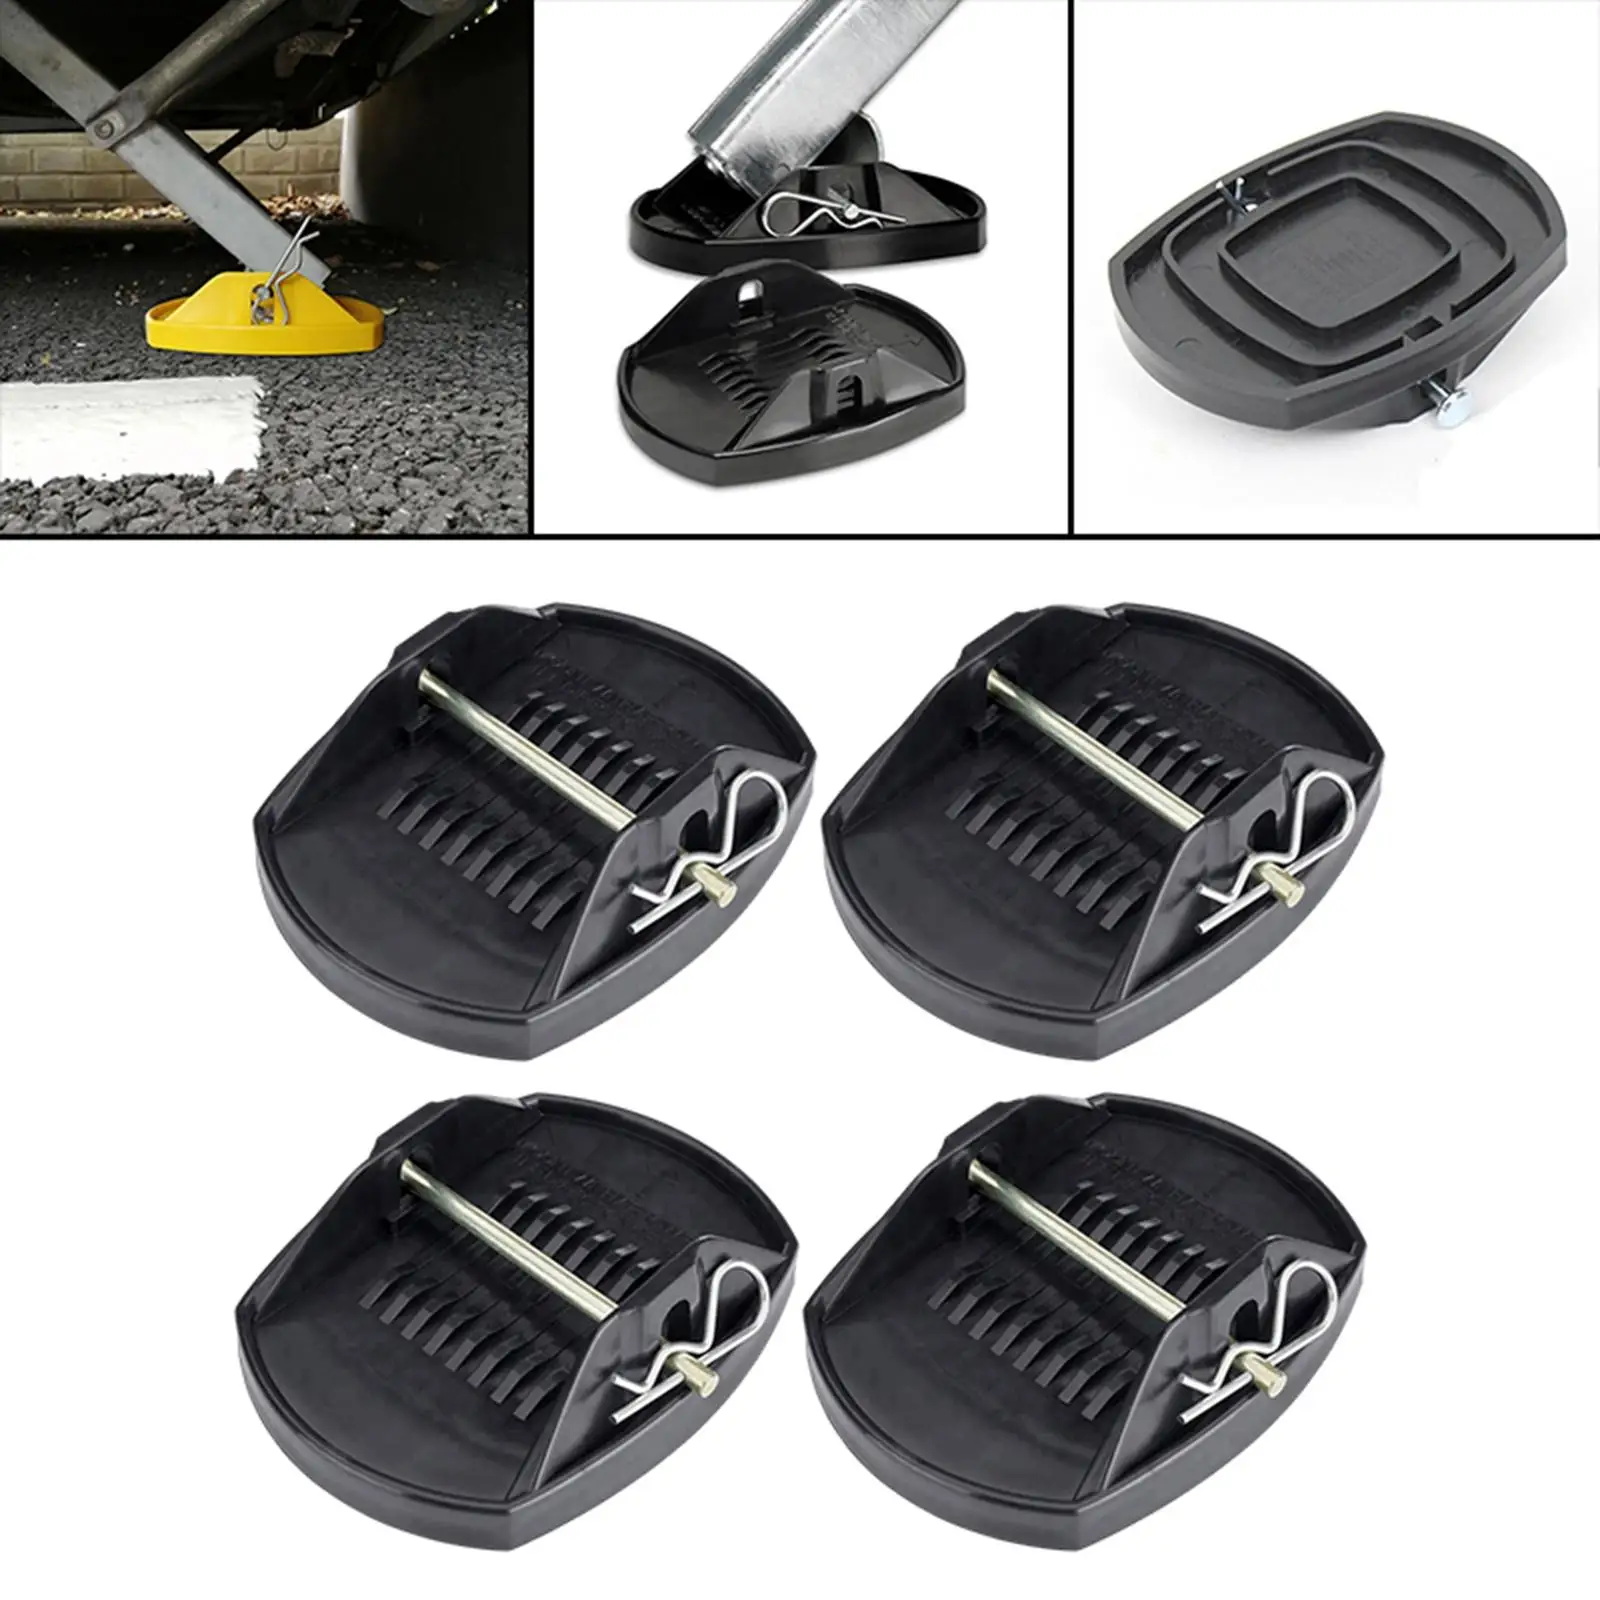 4 Pieces Pads, Parking Auxiliary Balance Wheel Foot Leg Support , Accessories Adapter Outrigger for Trailers RV